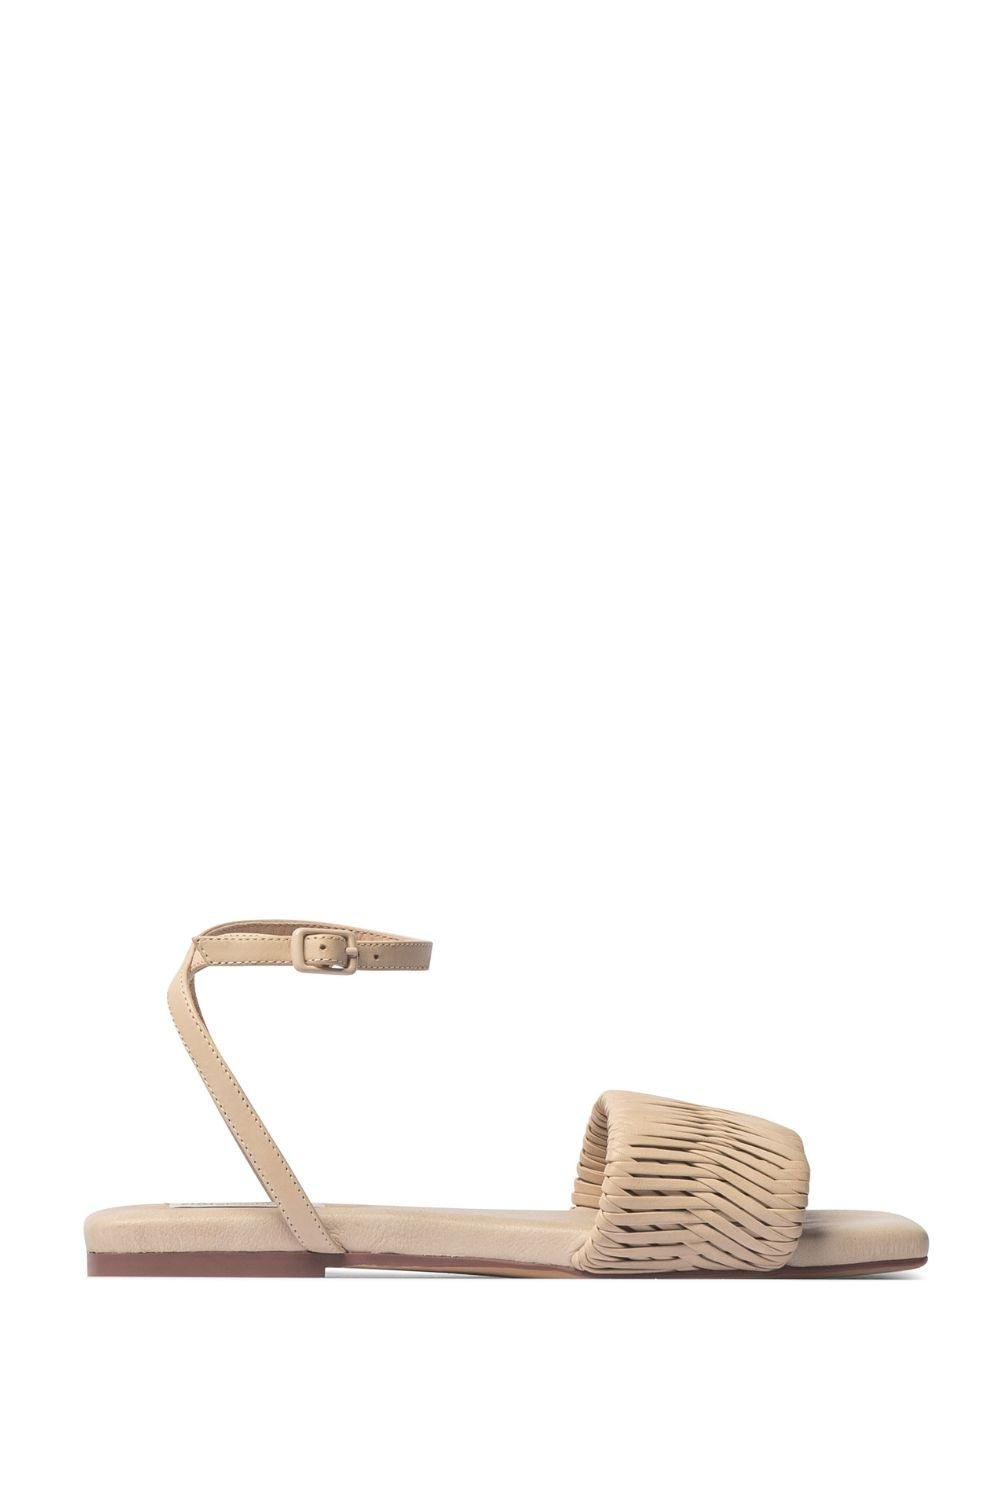 beige, sandal, woven strap, leather, square toe, product side image